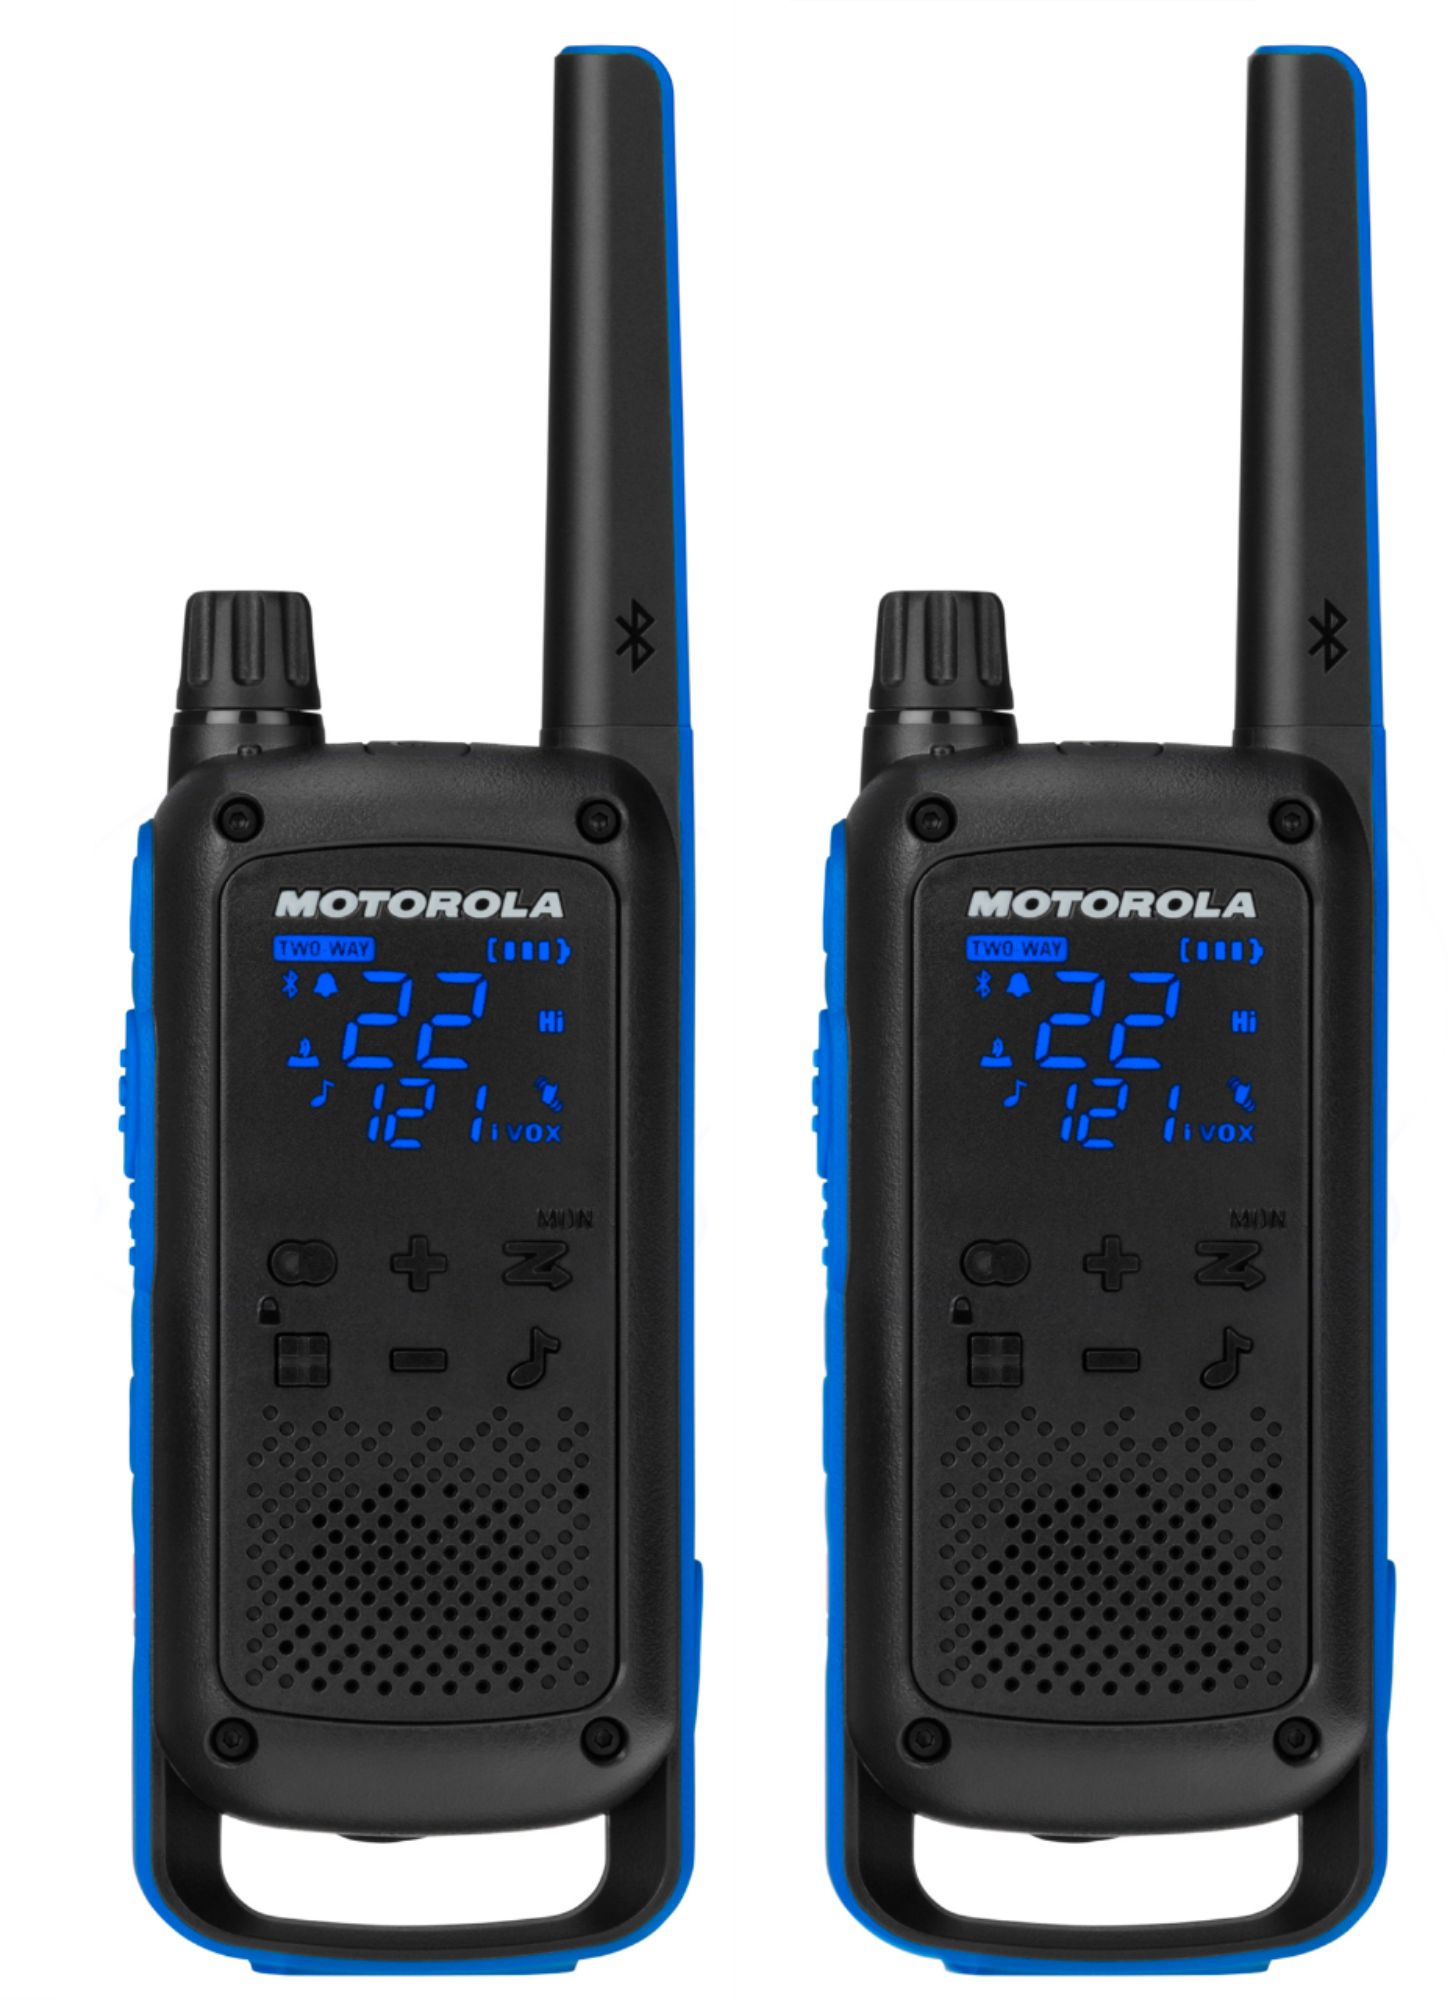 Angle View: Motorola - Solutions TALKABOUT T800 Two Way Radio - 2 Pack - Black/Blue